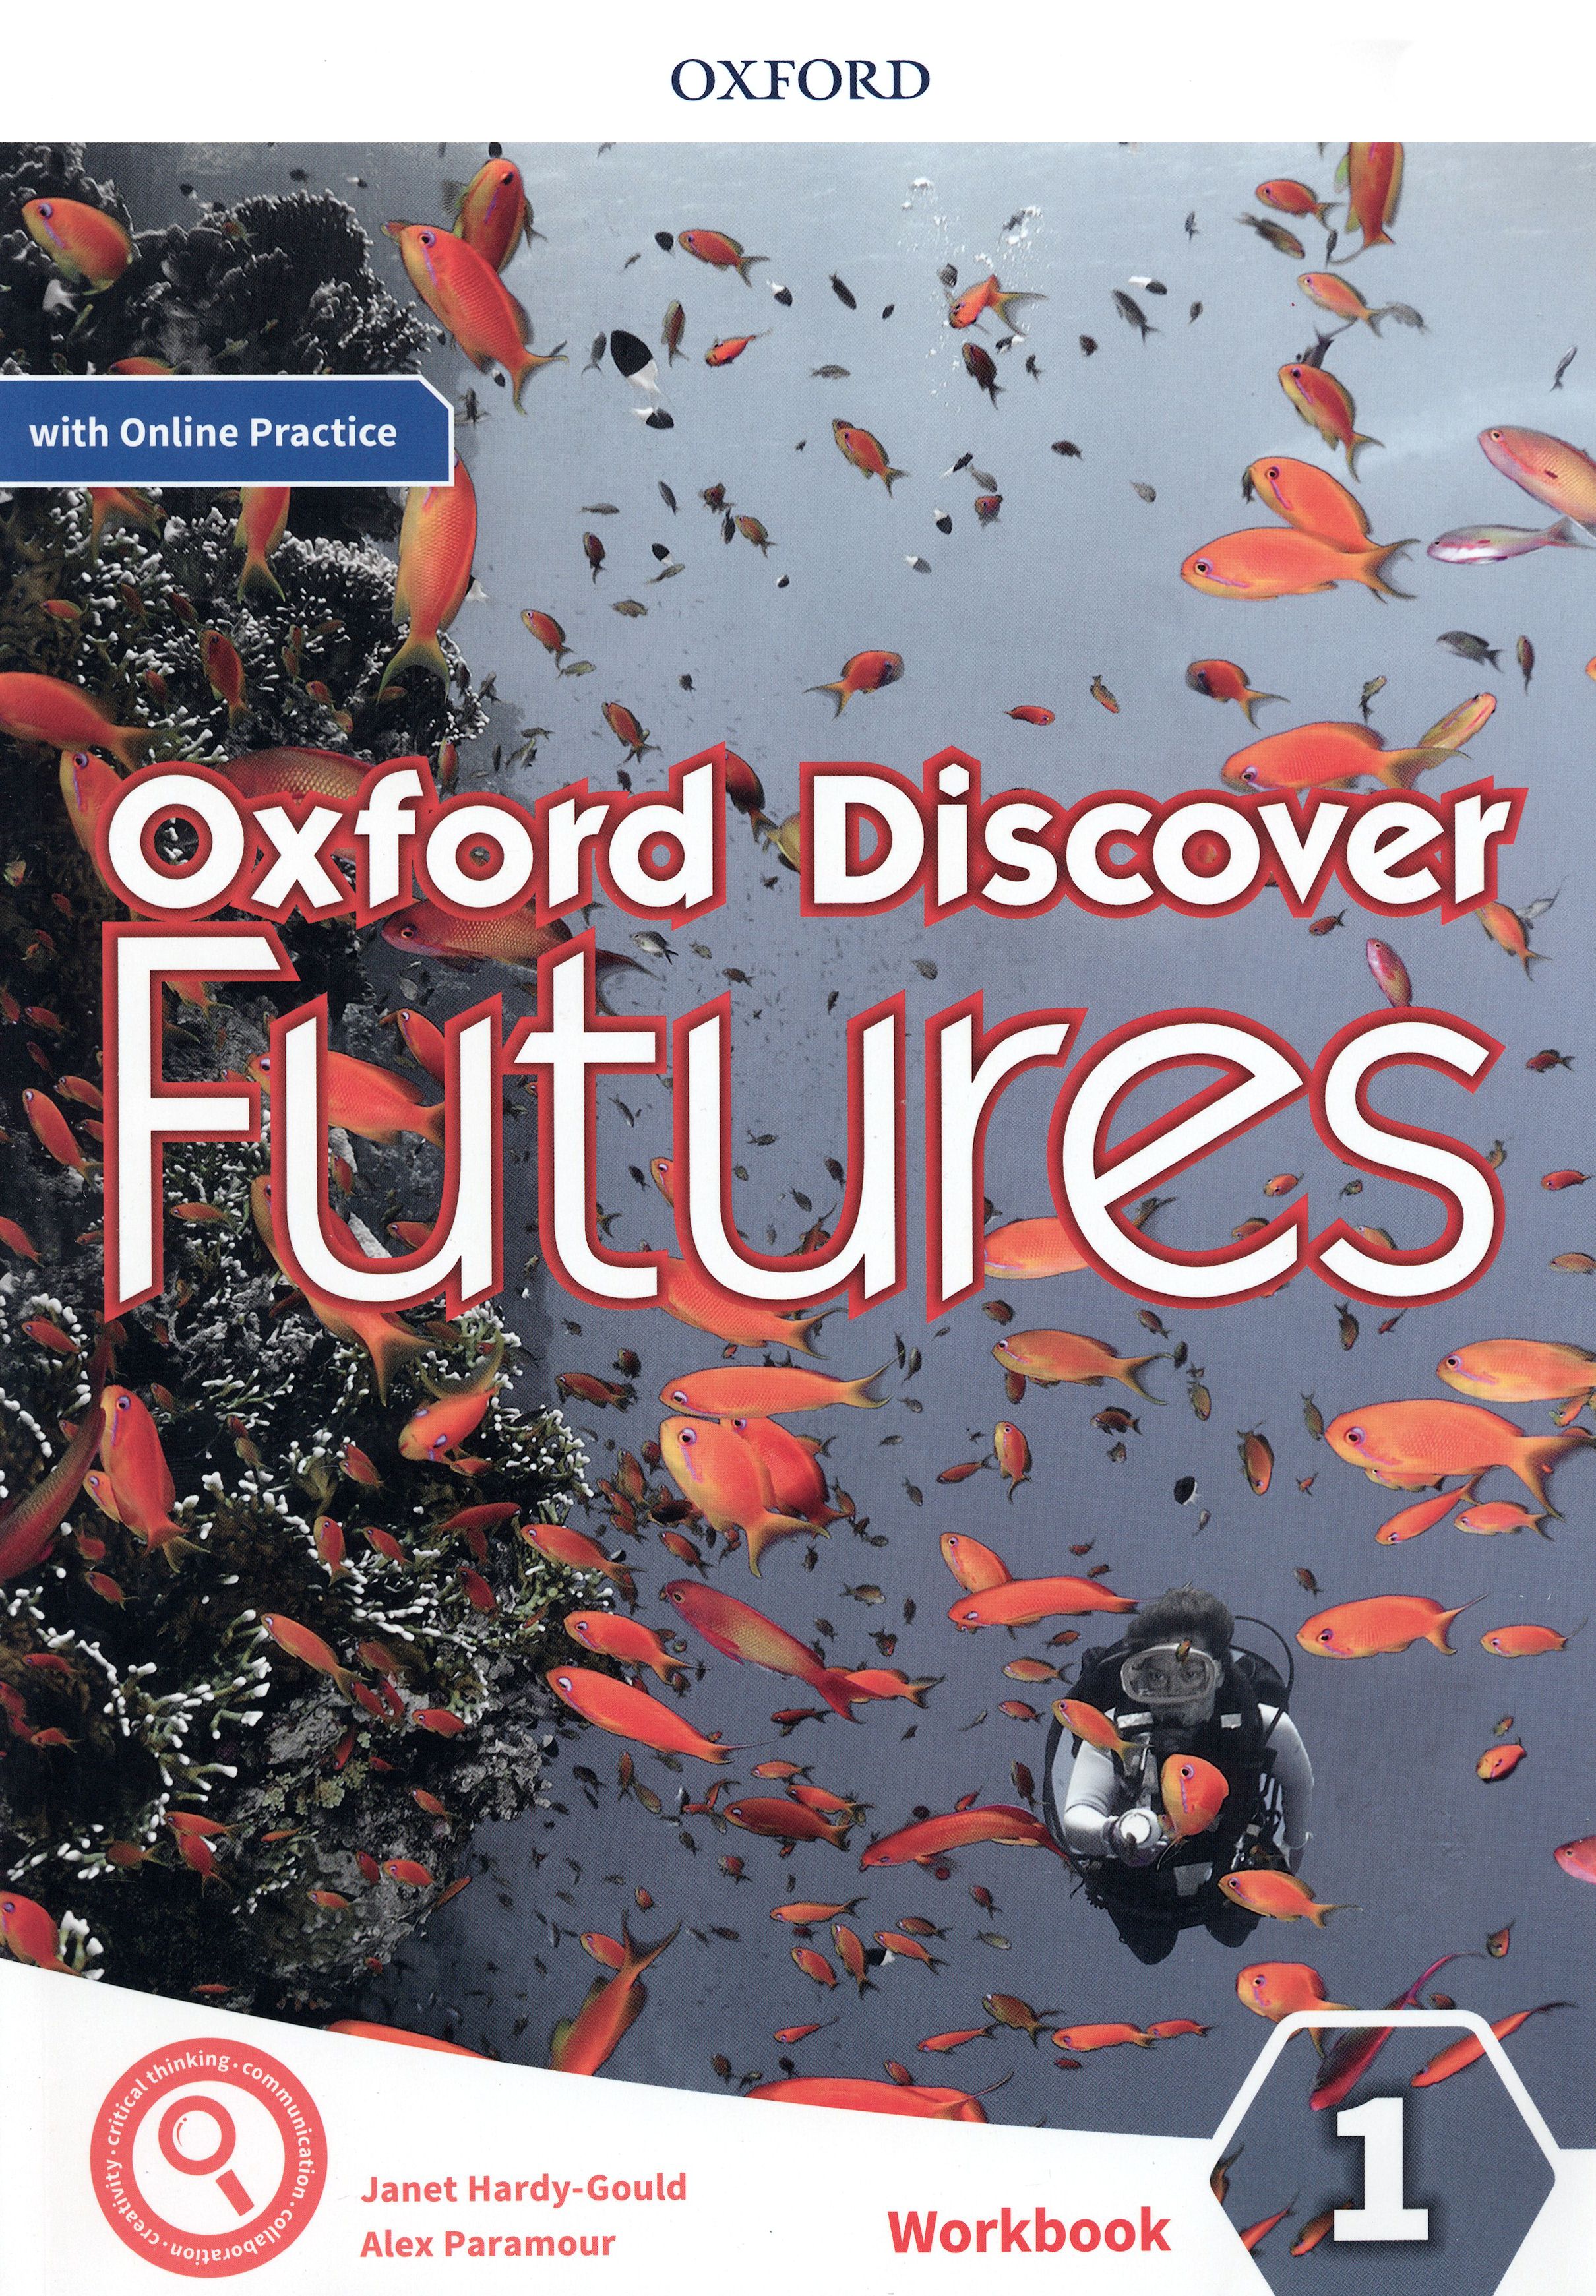 Oxford discover book. Oxford Futures 1 Workbook. Oxford discover Futures 4 Workbook. Oxford discover Futures. Oxford discover Futures 1.